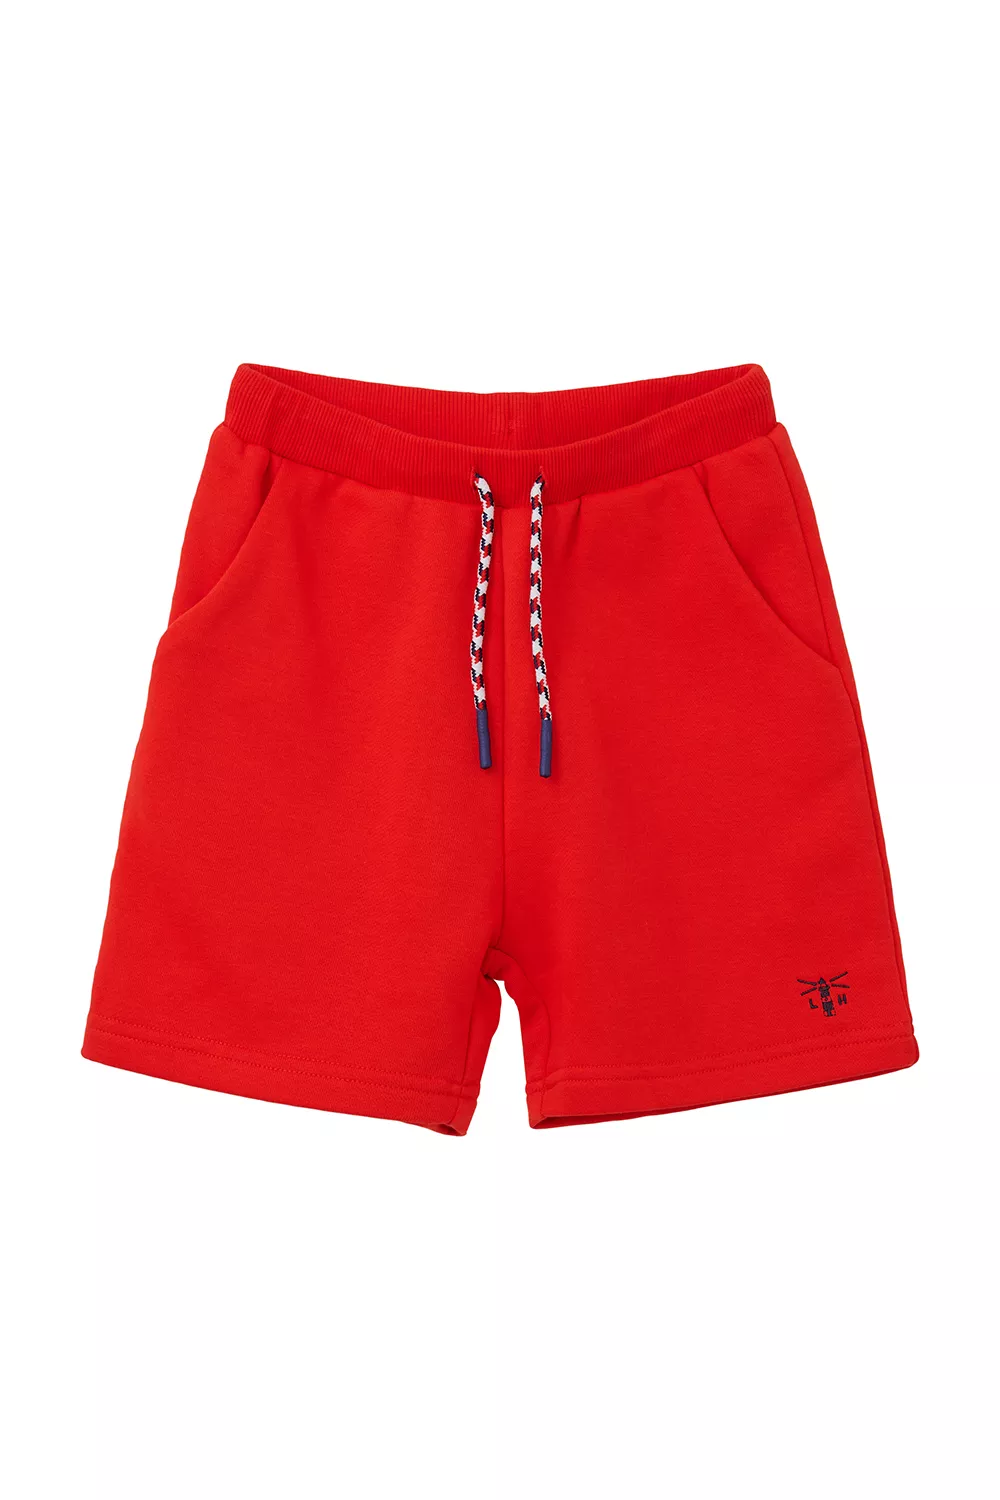 Louie Shorts Red 3-4yrs